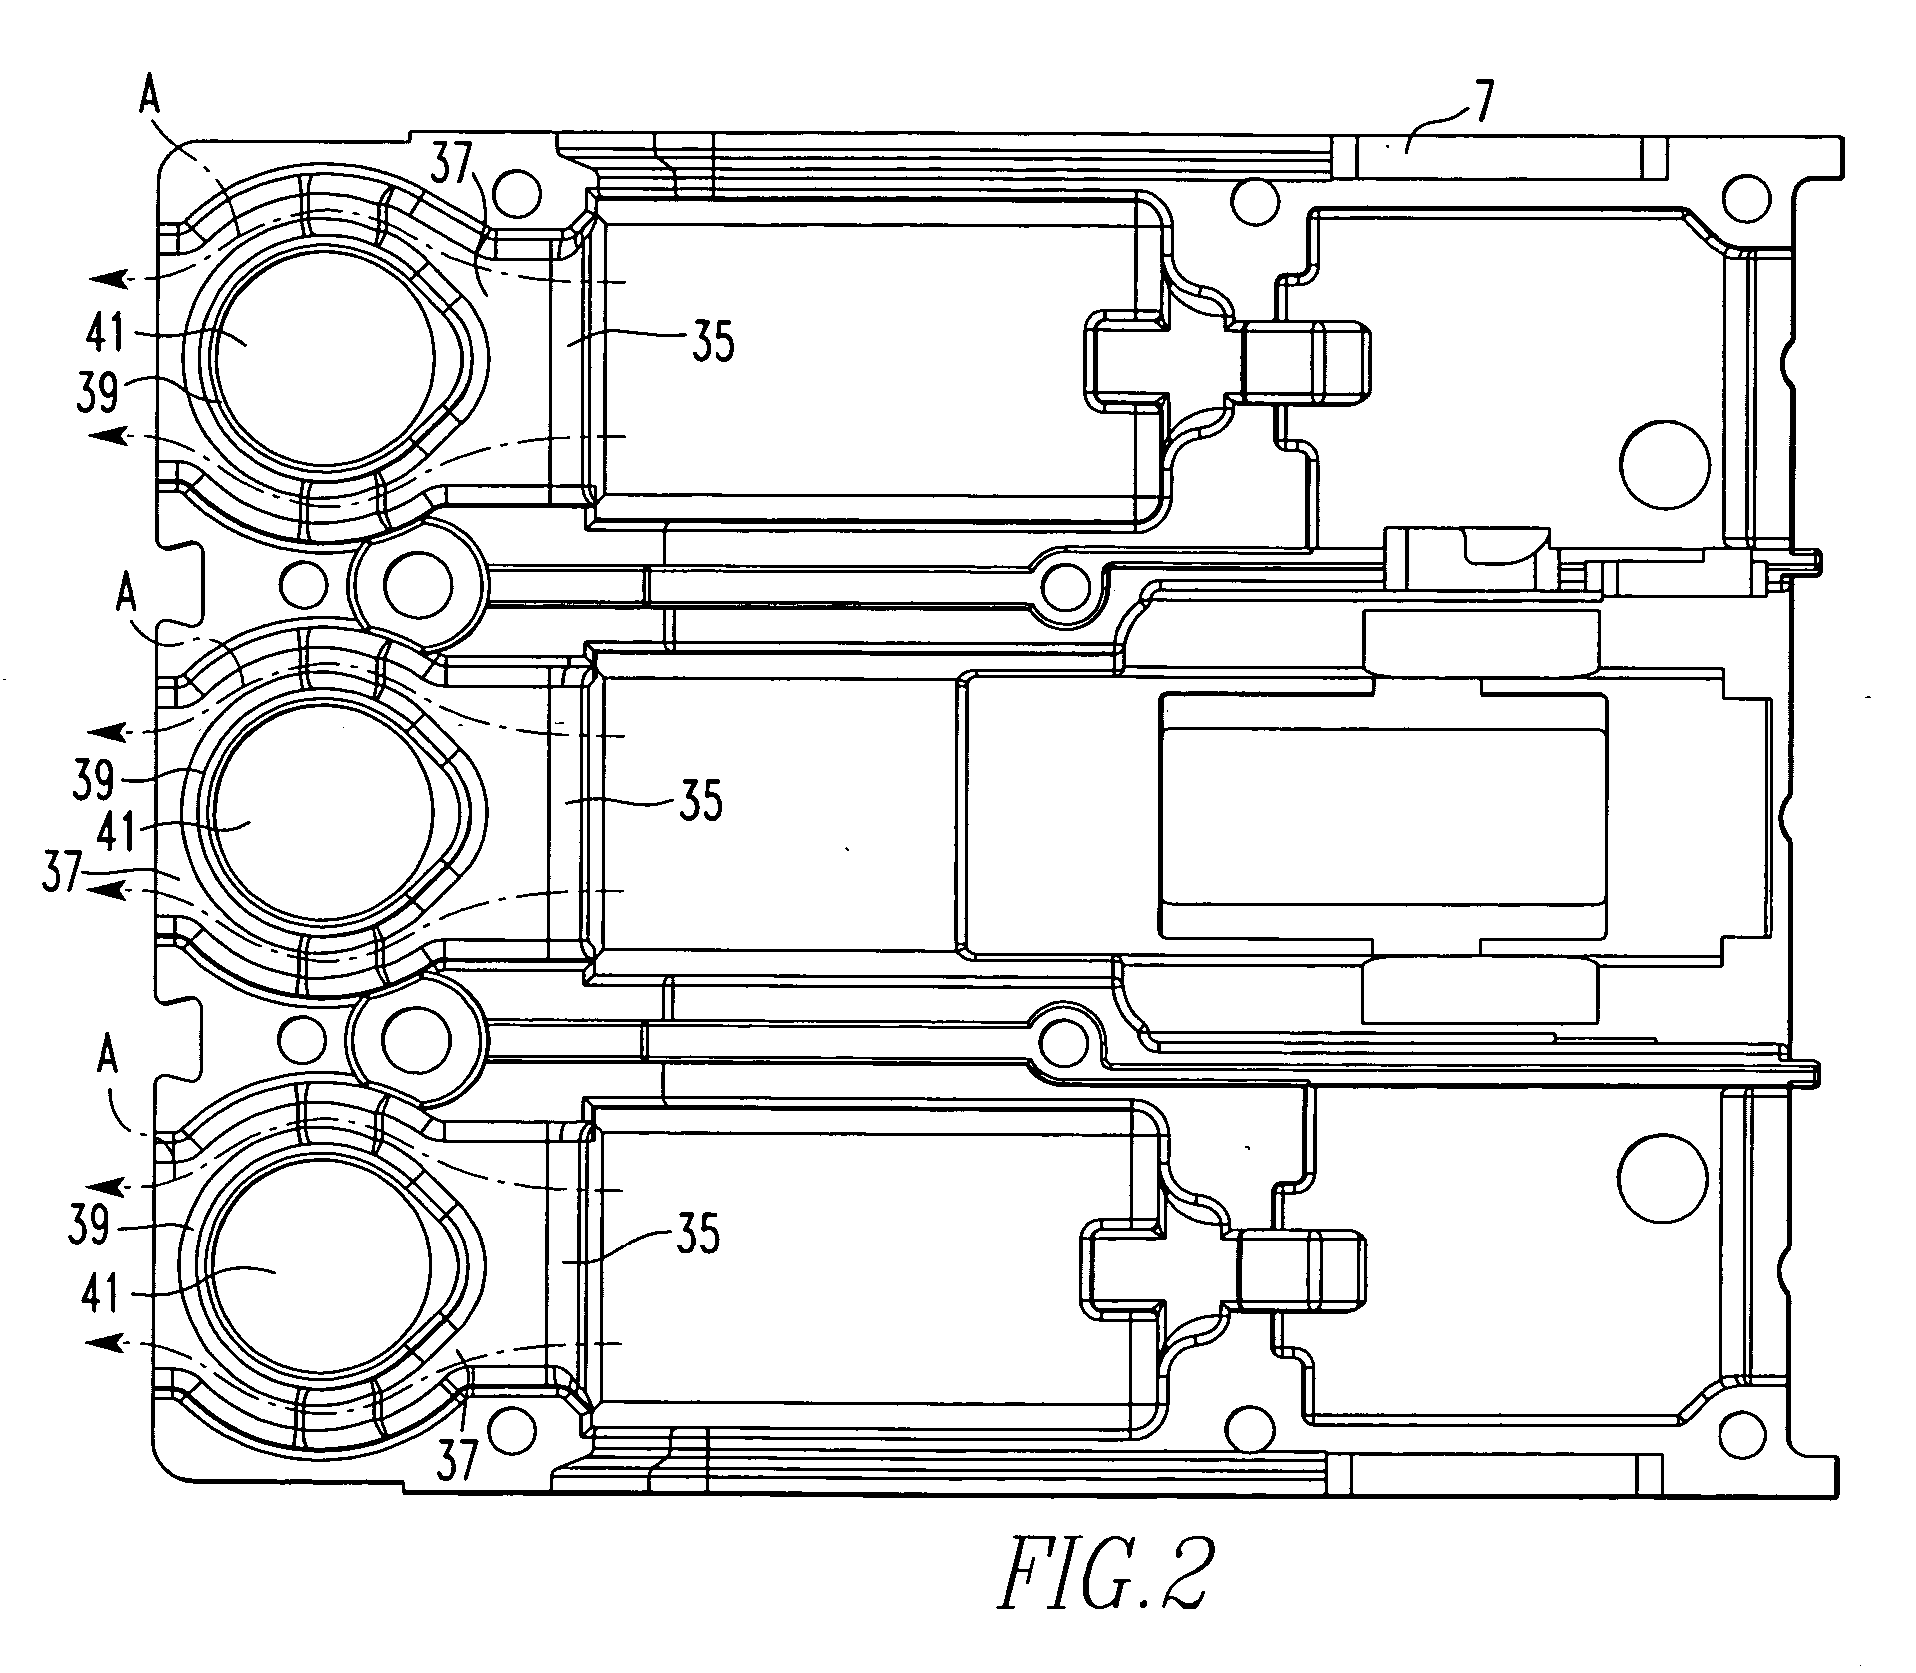 ARC chute assembly and electric power switch incorporating same